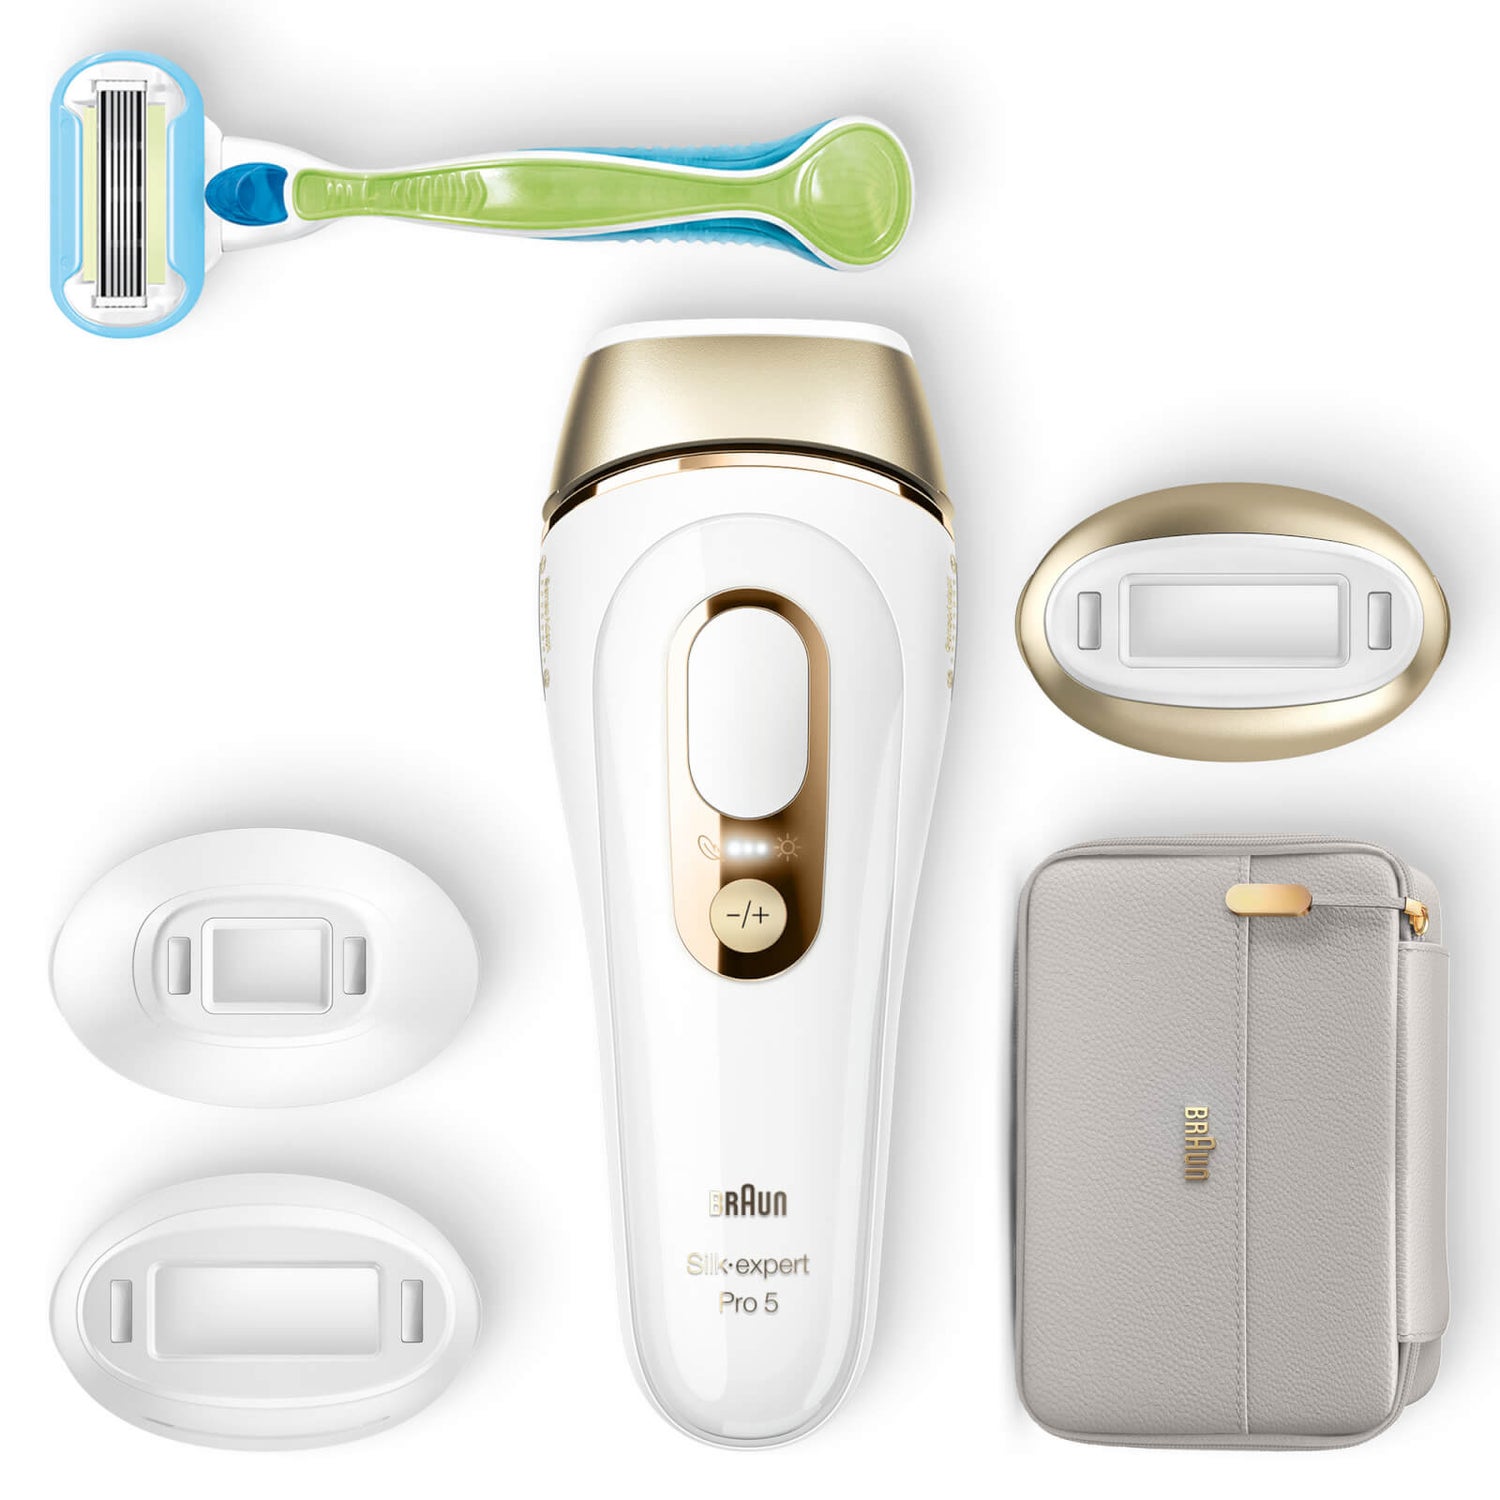 Braun Silk·expert Pro 5 PL5257 Women’s IPL, At-Home Permanent Visible Hair Removal, White/Gold